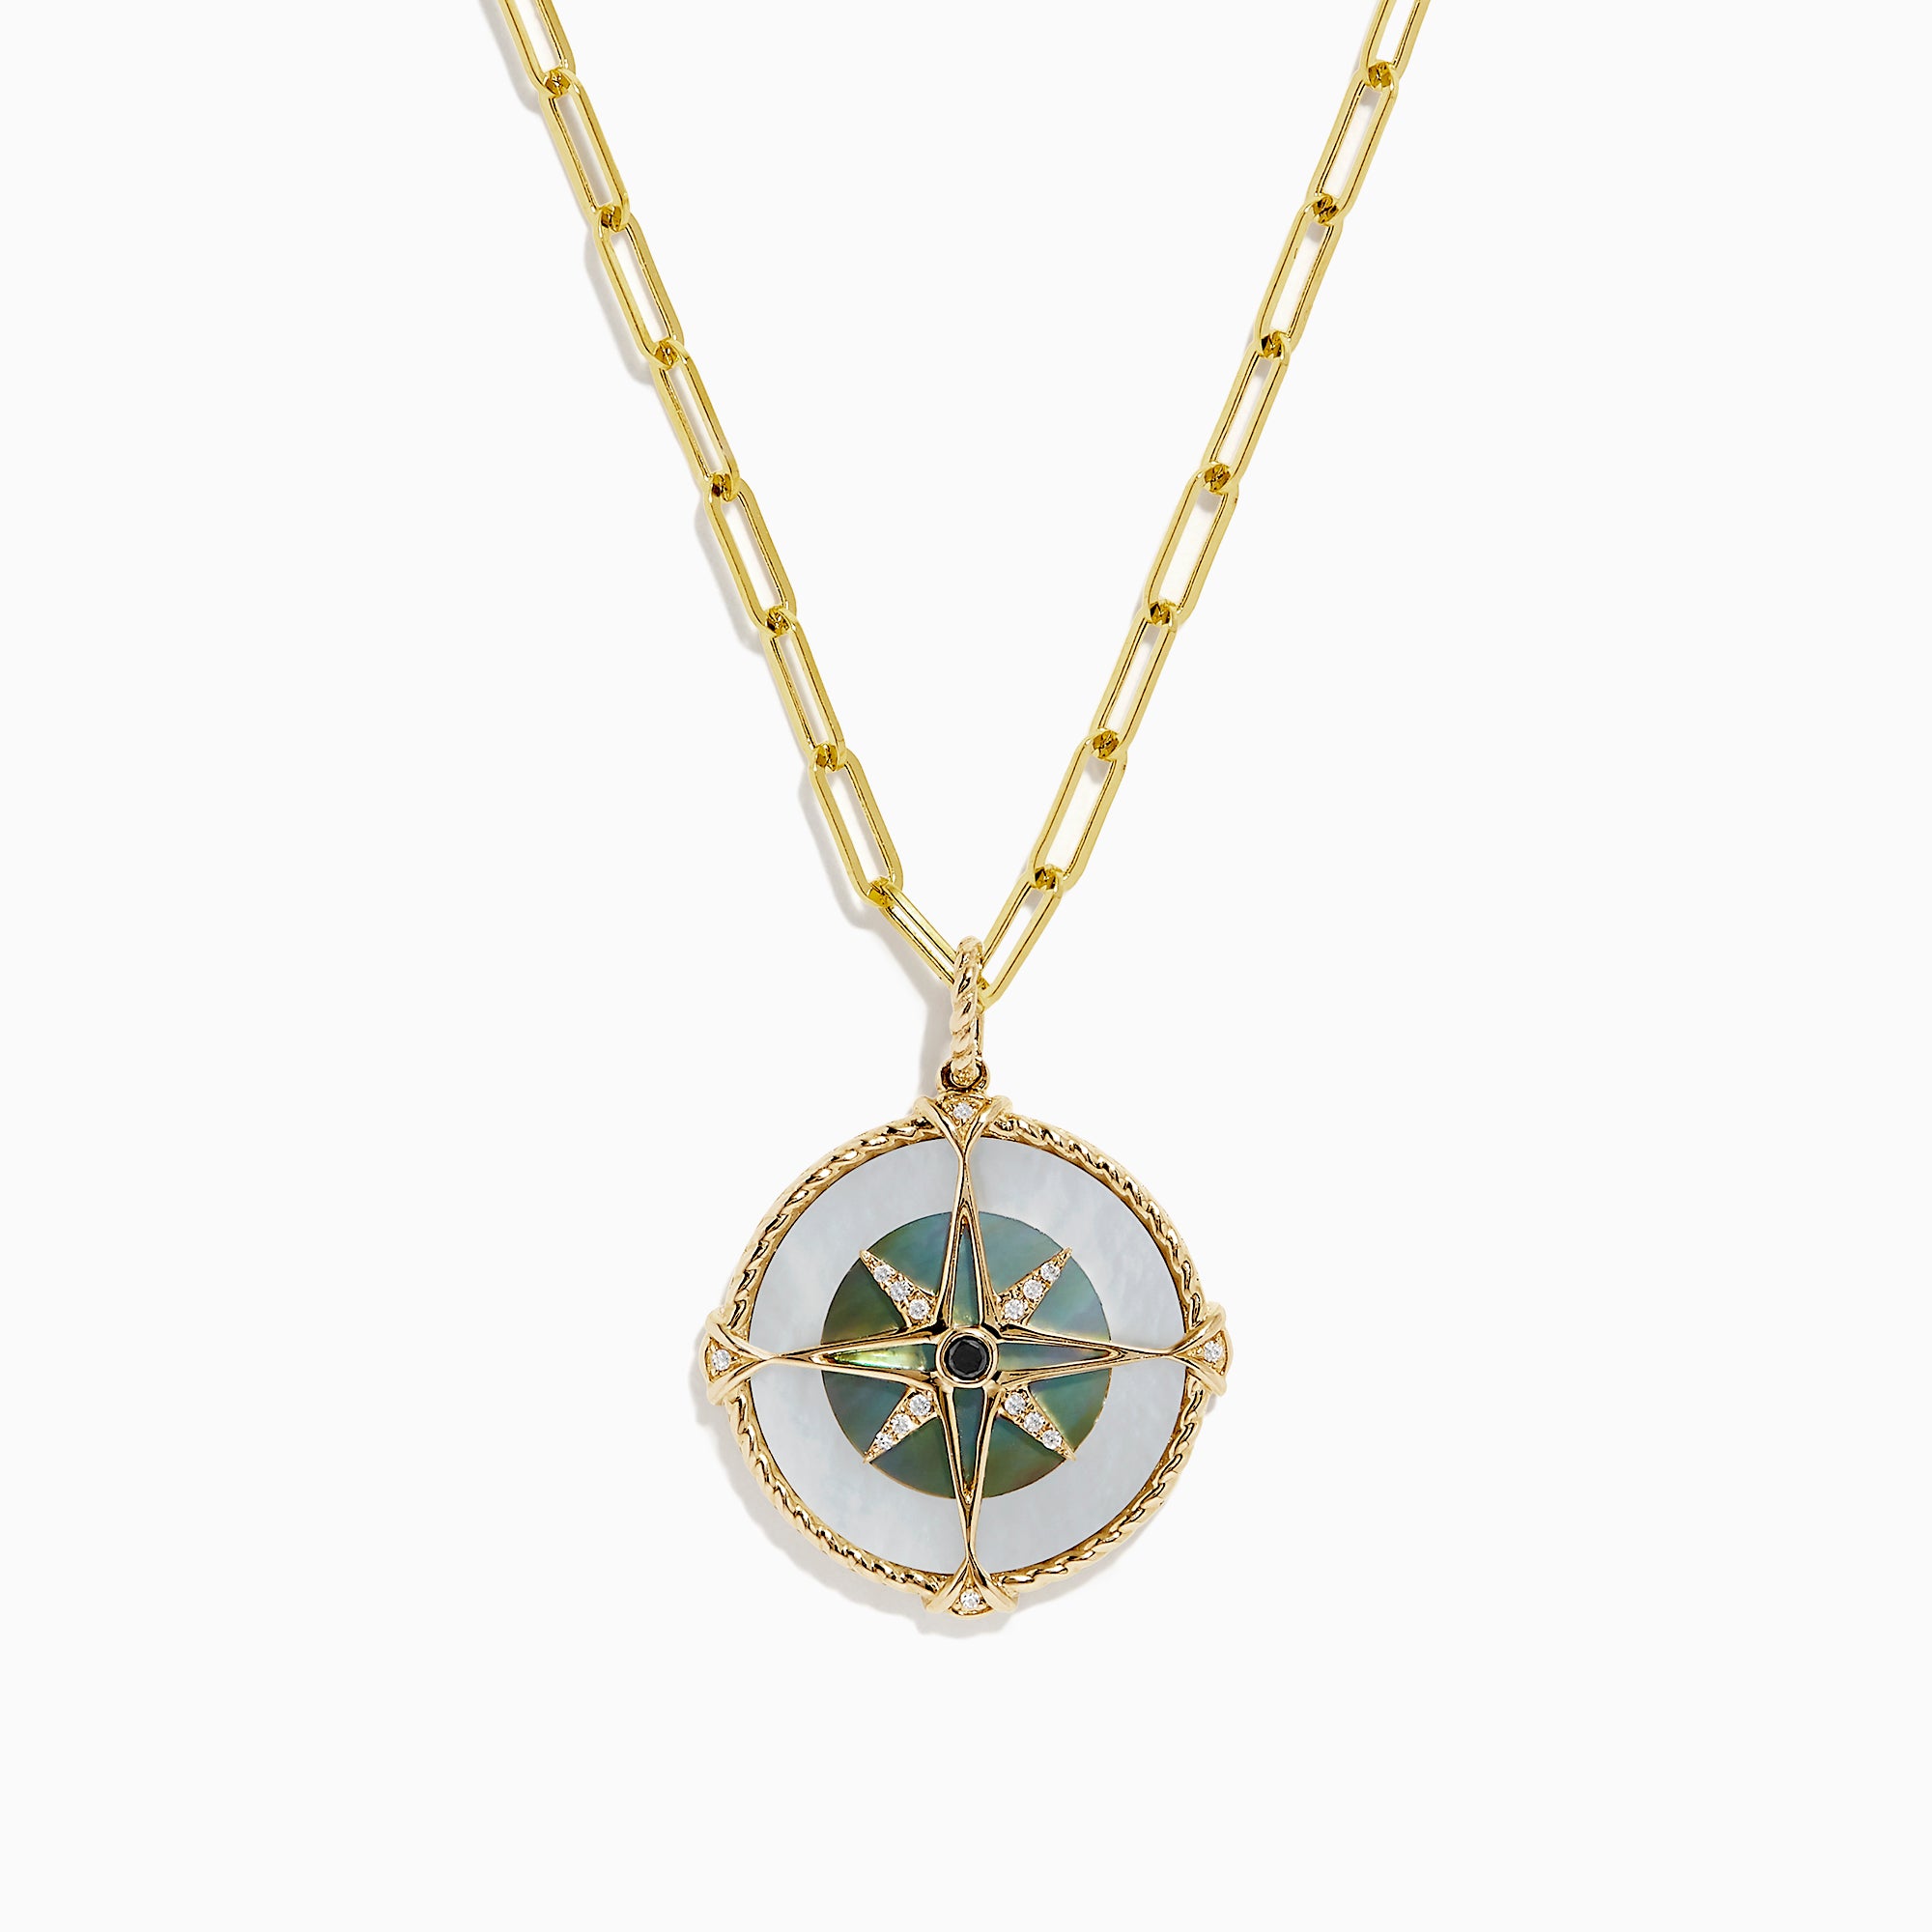 Mini Etched Cut-Out Compass Disc Necklace in 14K Gold | Zales